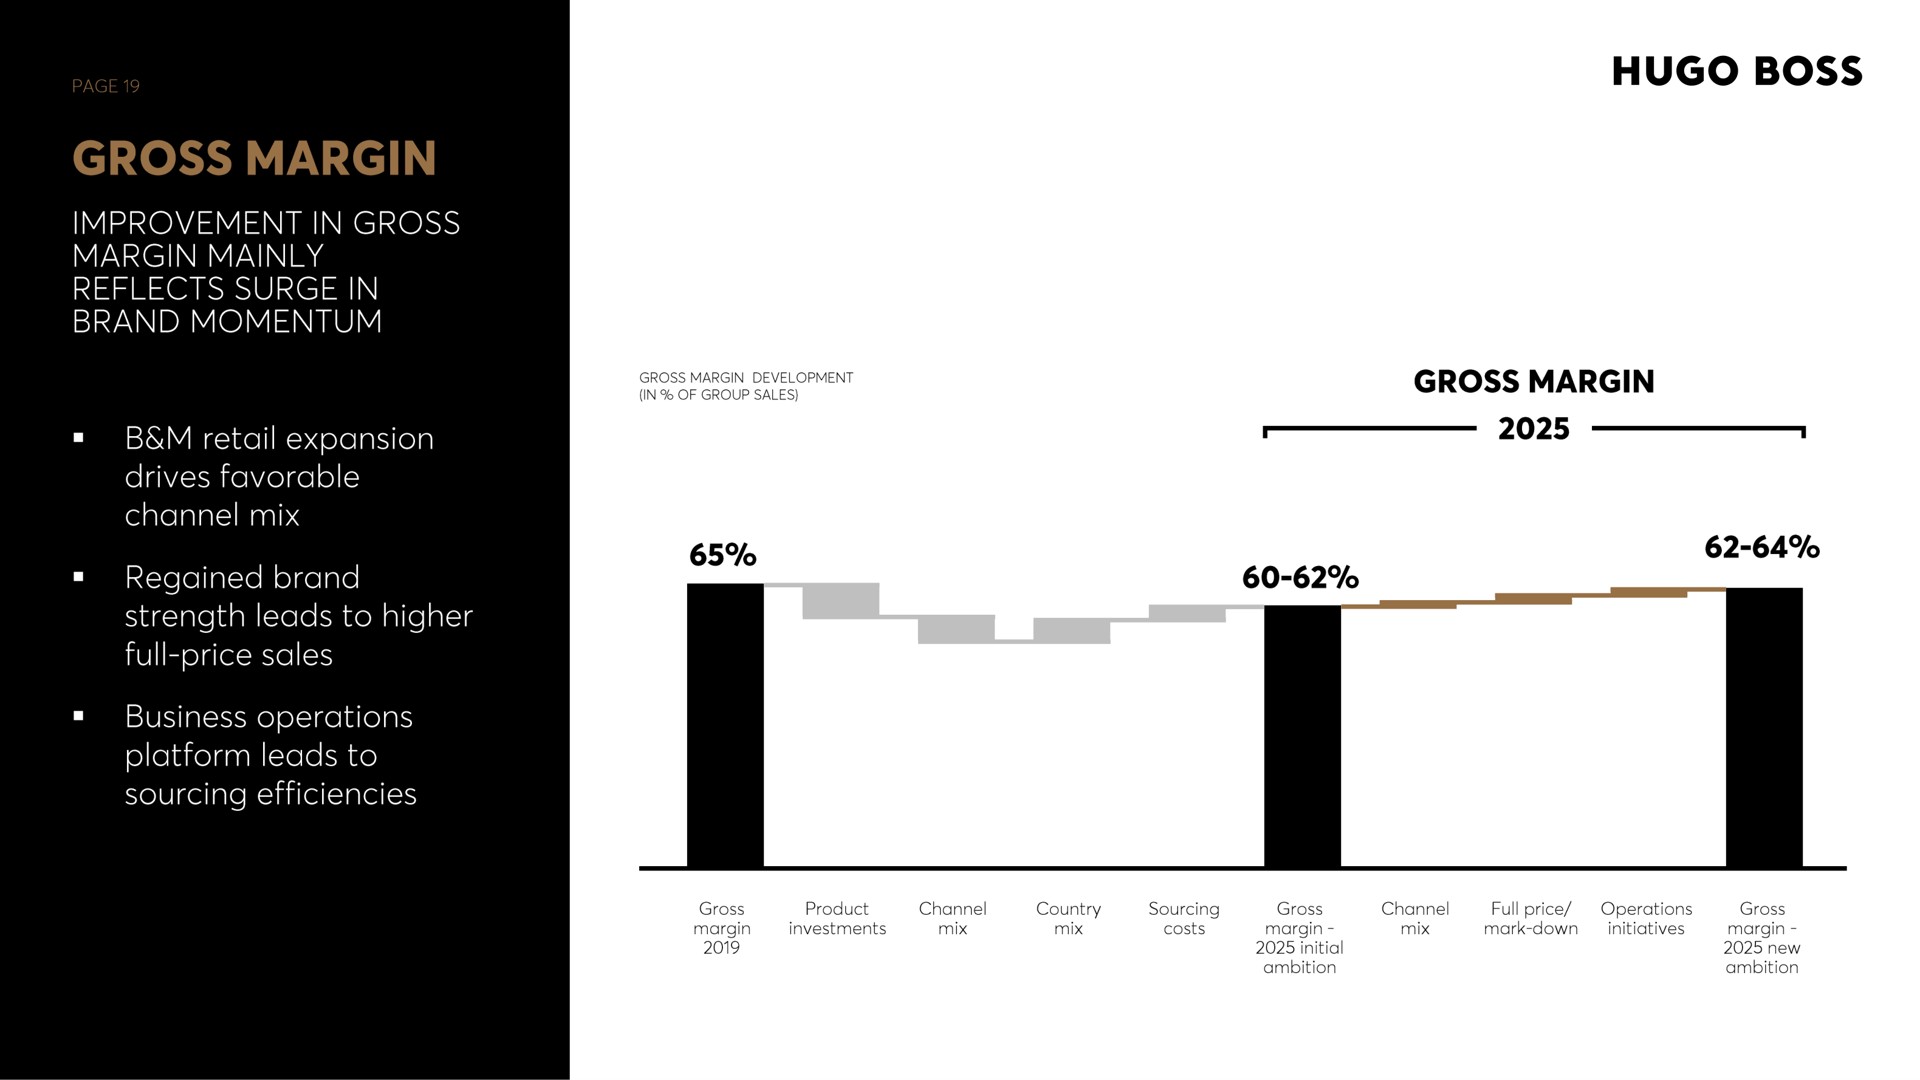 improvement in gross margin mainly reflects surge in brand momentum retail expansion boss of group sales gross margin regained brand strength leads to higher full price sales sourcing efficiencies platform leads to | Hugo Boss